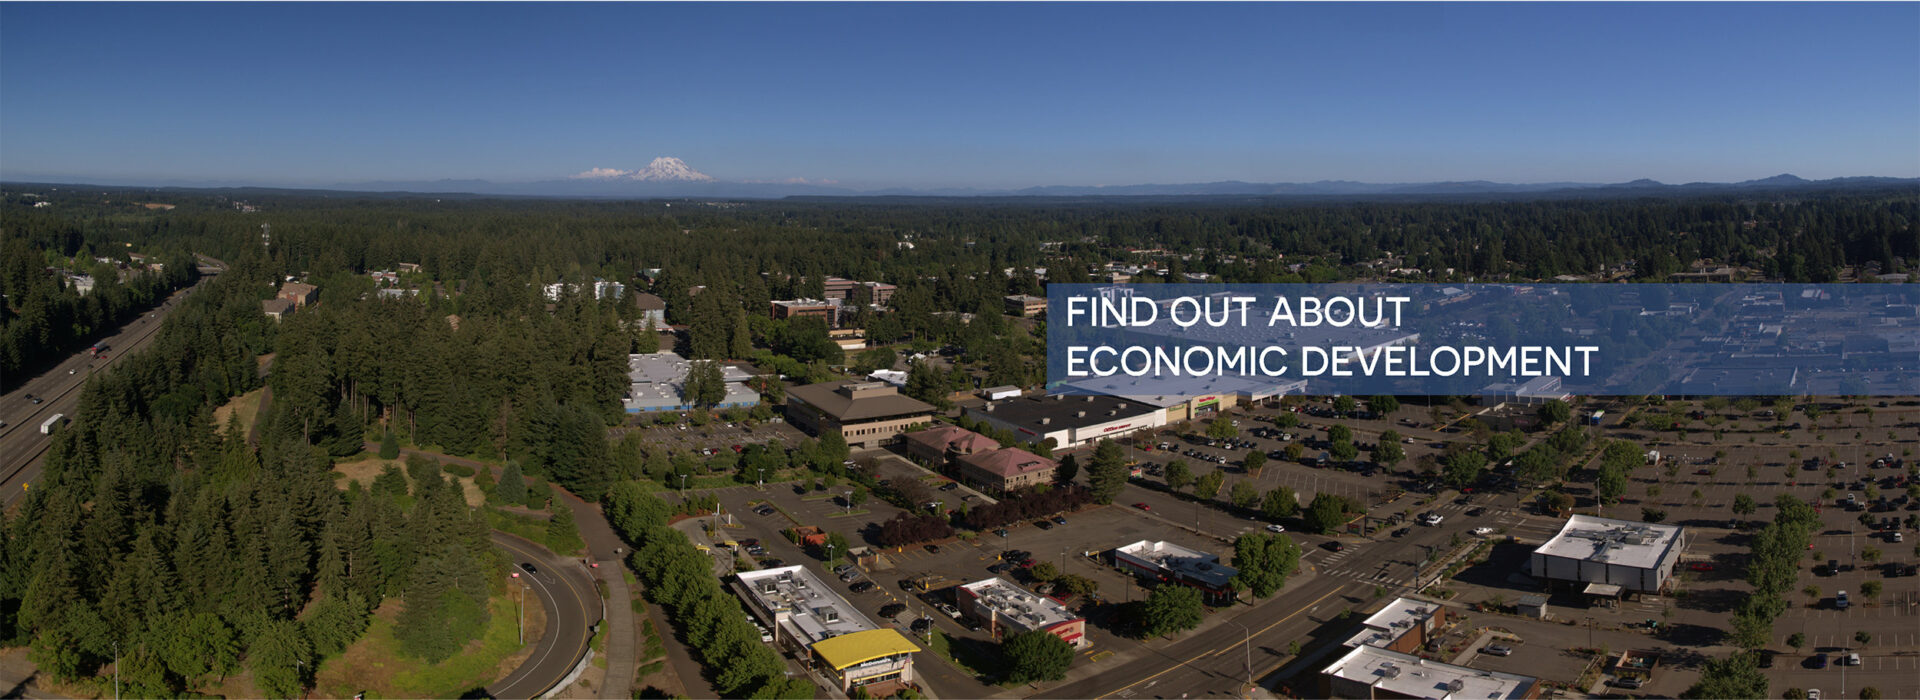 Aerial image of Midtown Lacey and Interstate 5 - click this image to learn more about Economic Development